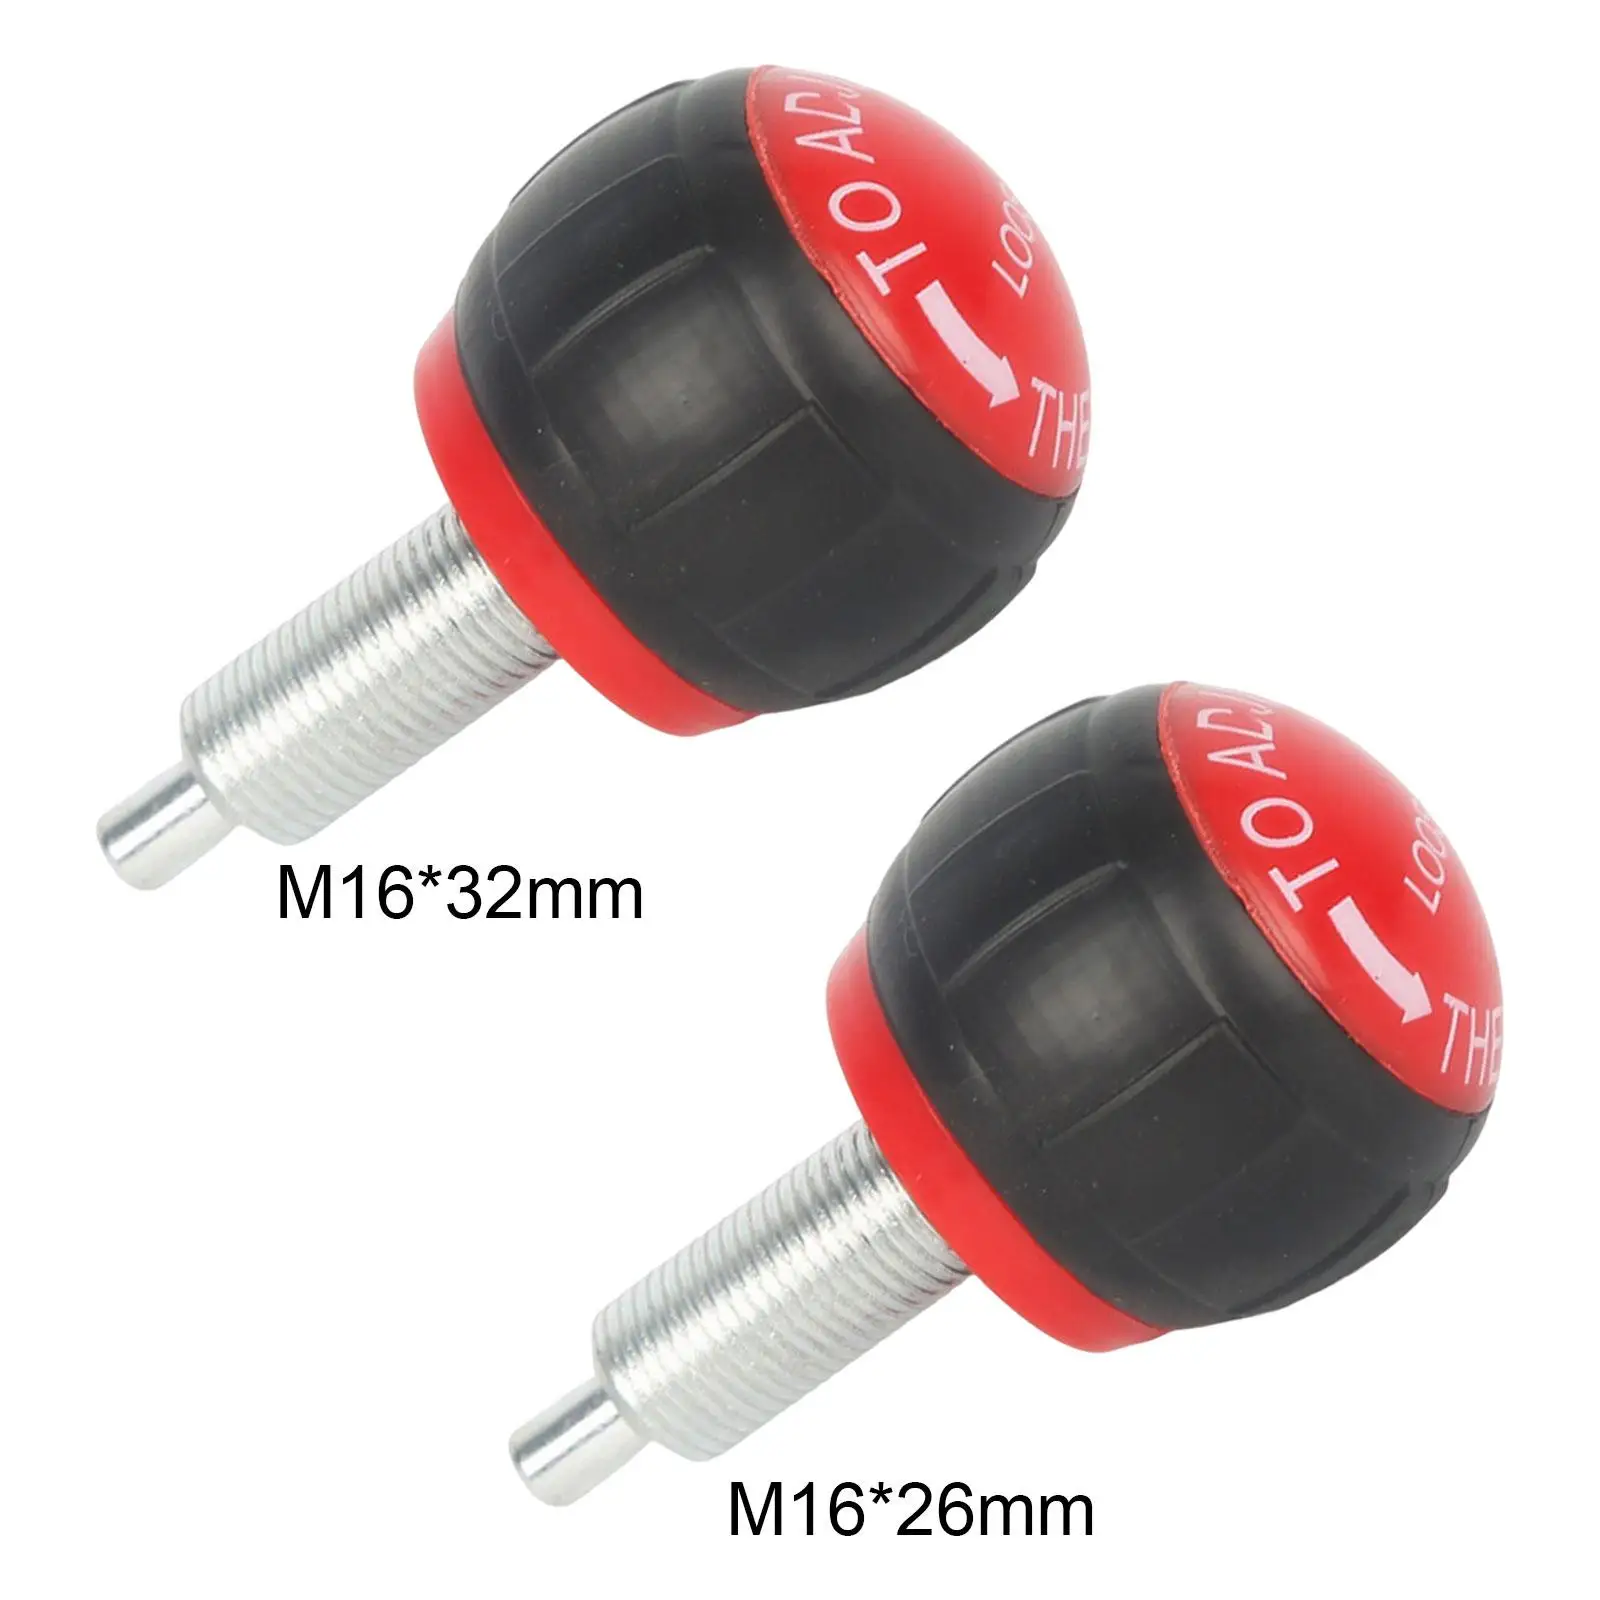 Fitness Bike Pull Pin M16 Thread Accessories Pull Pin Replacement Parts Sturdy Spring Knob for Cardio Training Gym Exercise Bike